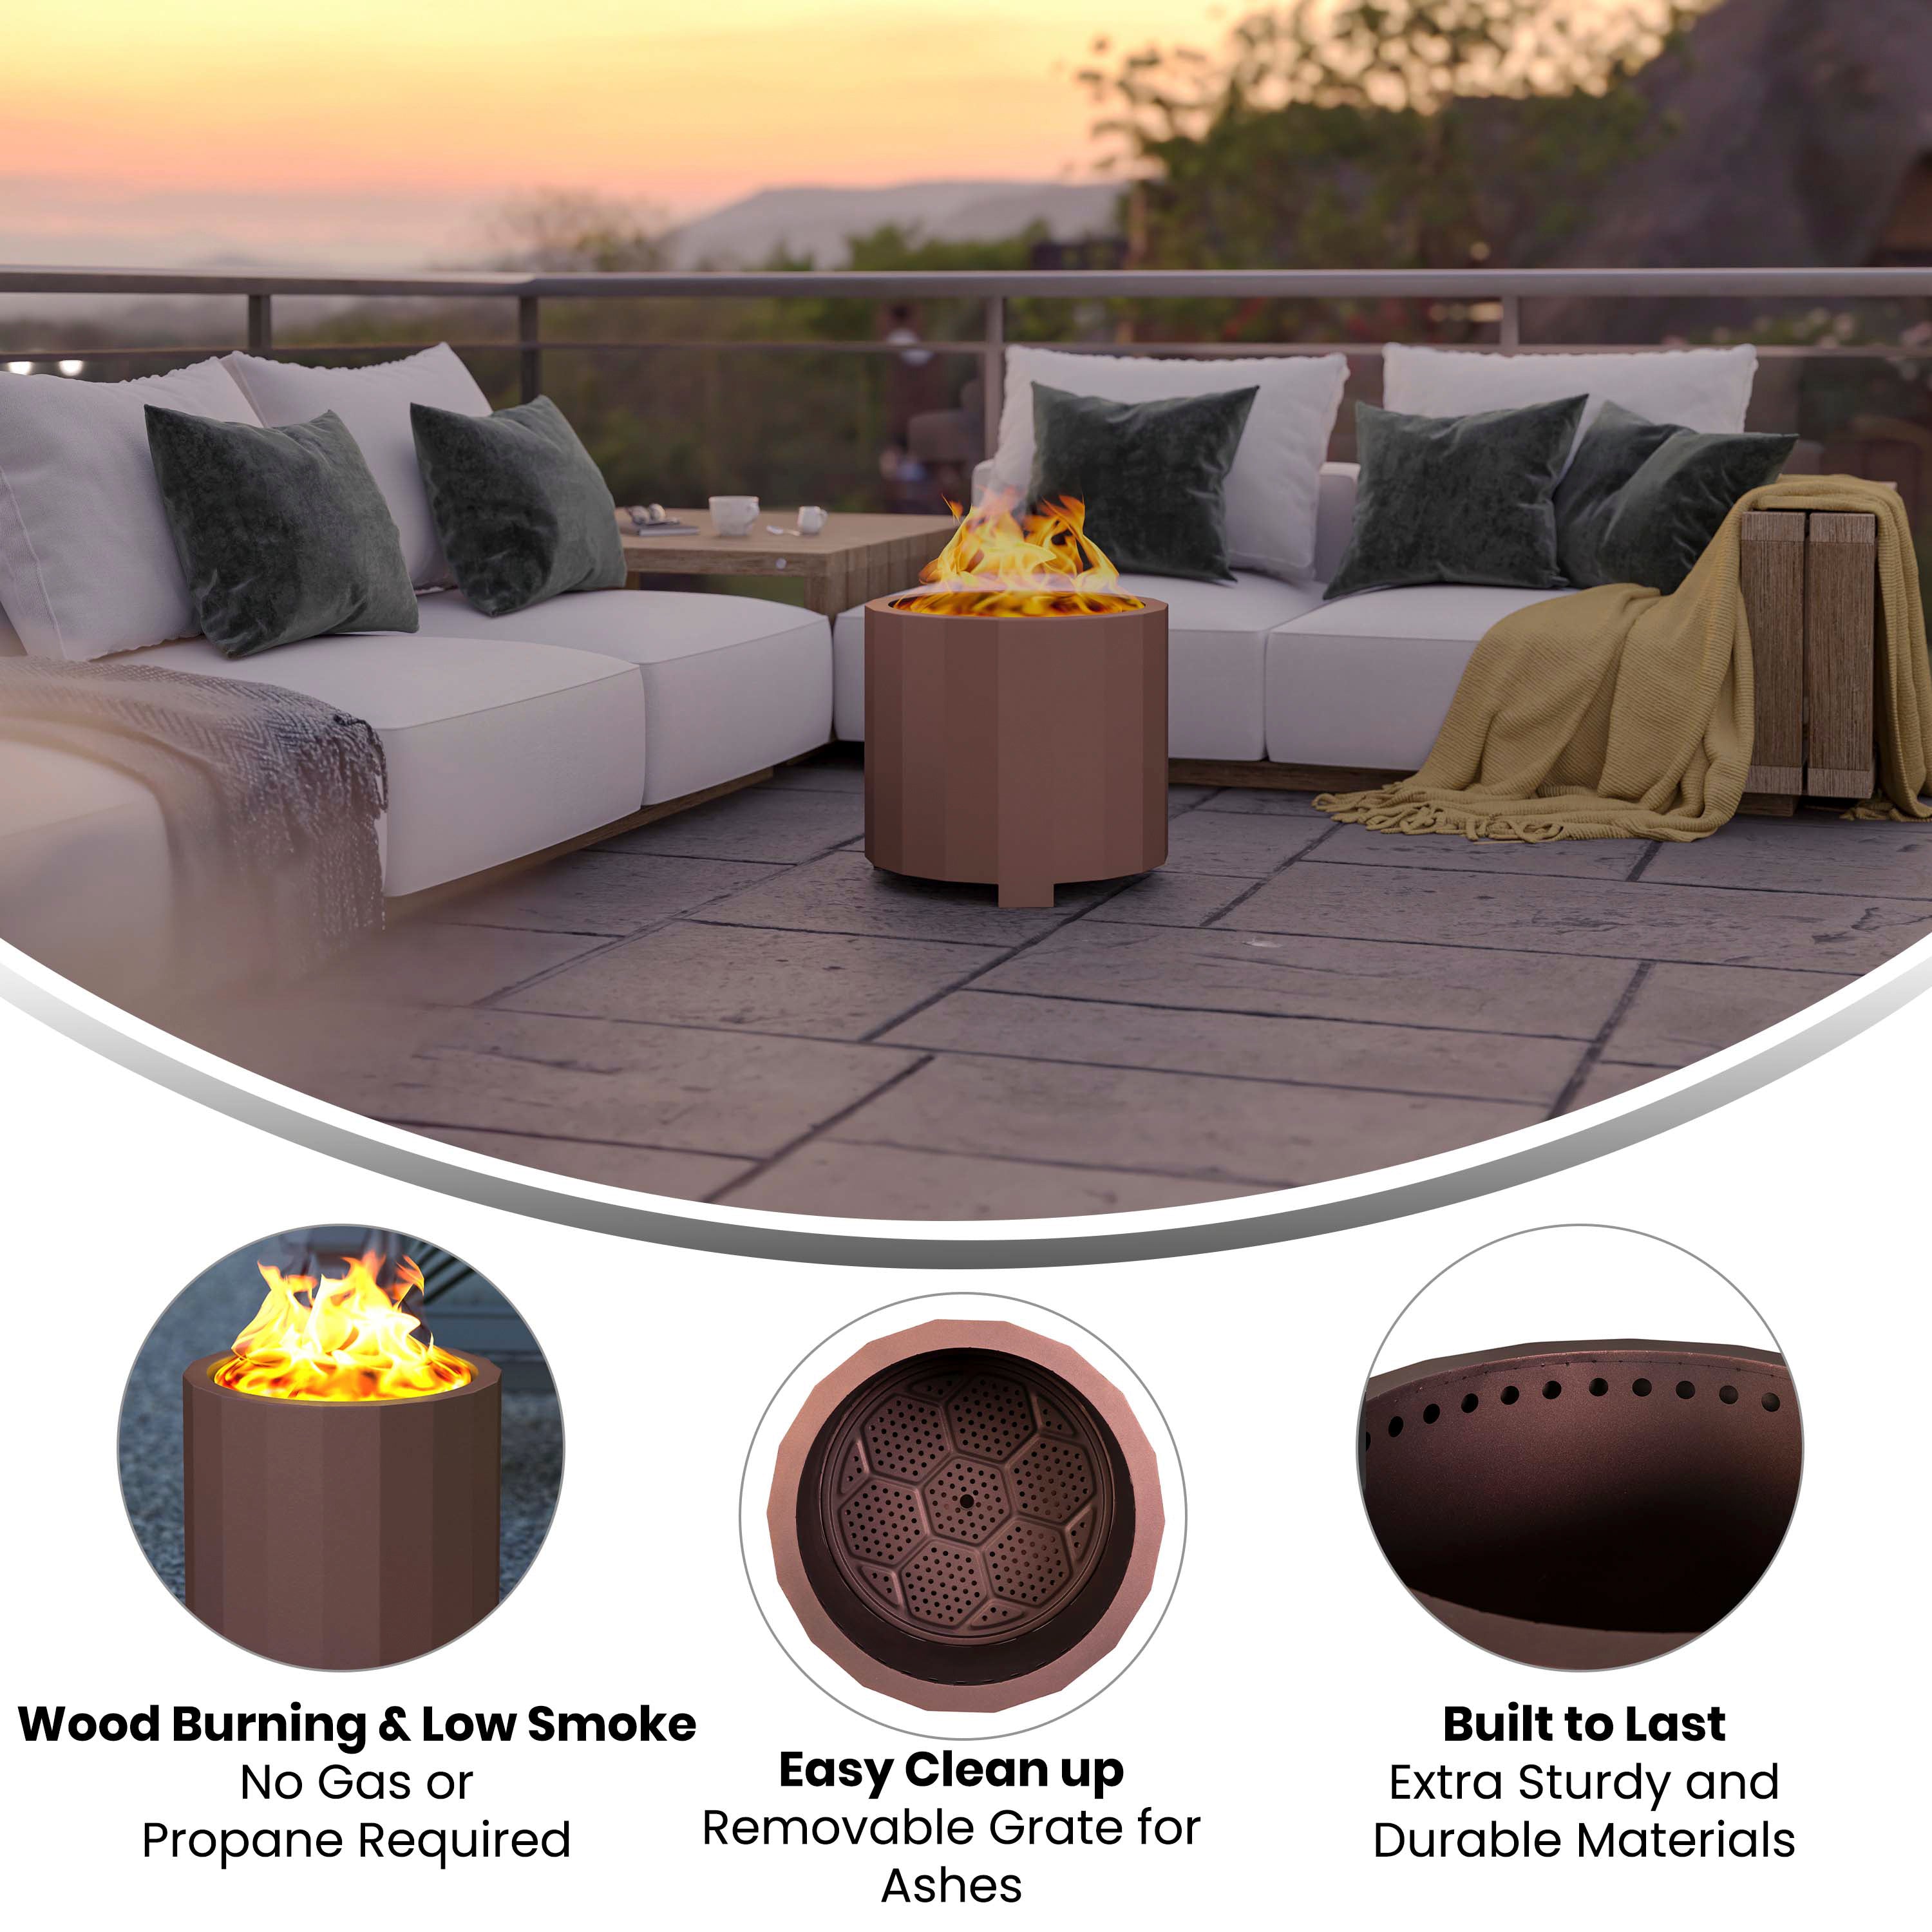 Titus Commercial Grade 19.5 inch Smokeless Outdoor Firepit, Natural Wood Burning Portable Fire Pit With Waterproof Cover-Outdoor FirePit-Flash Furniture-Wall2Wall Furnishings